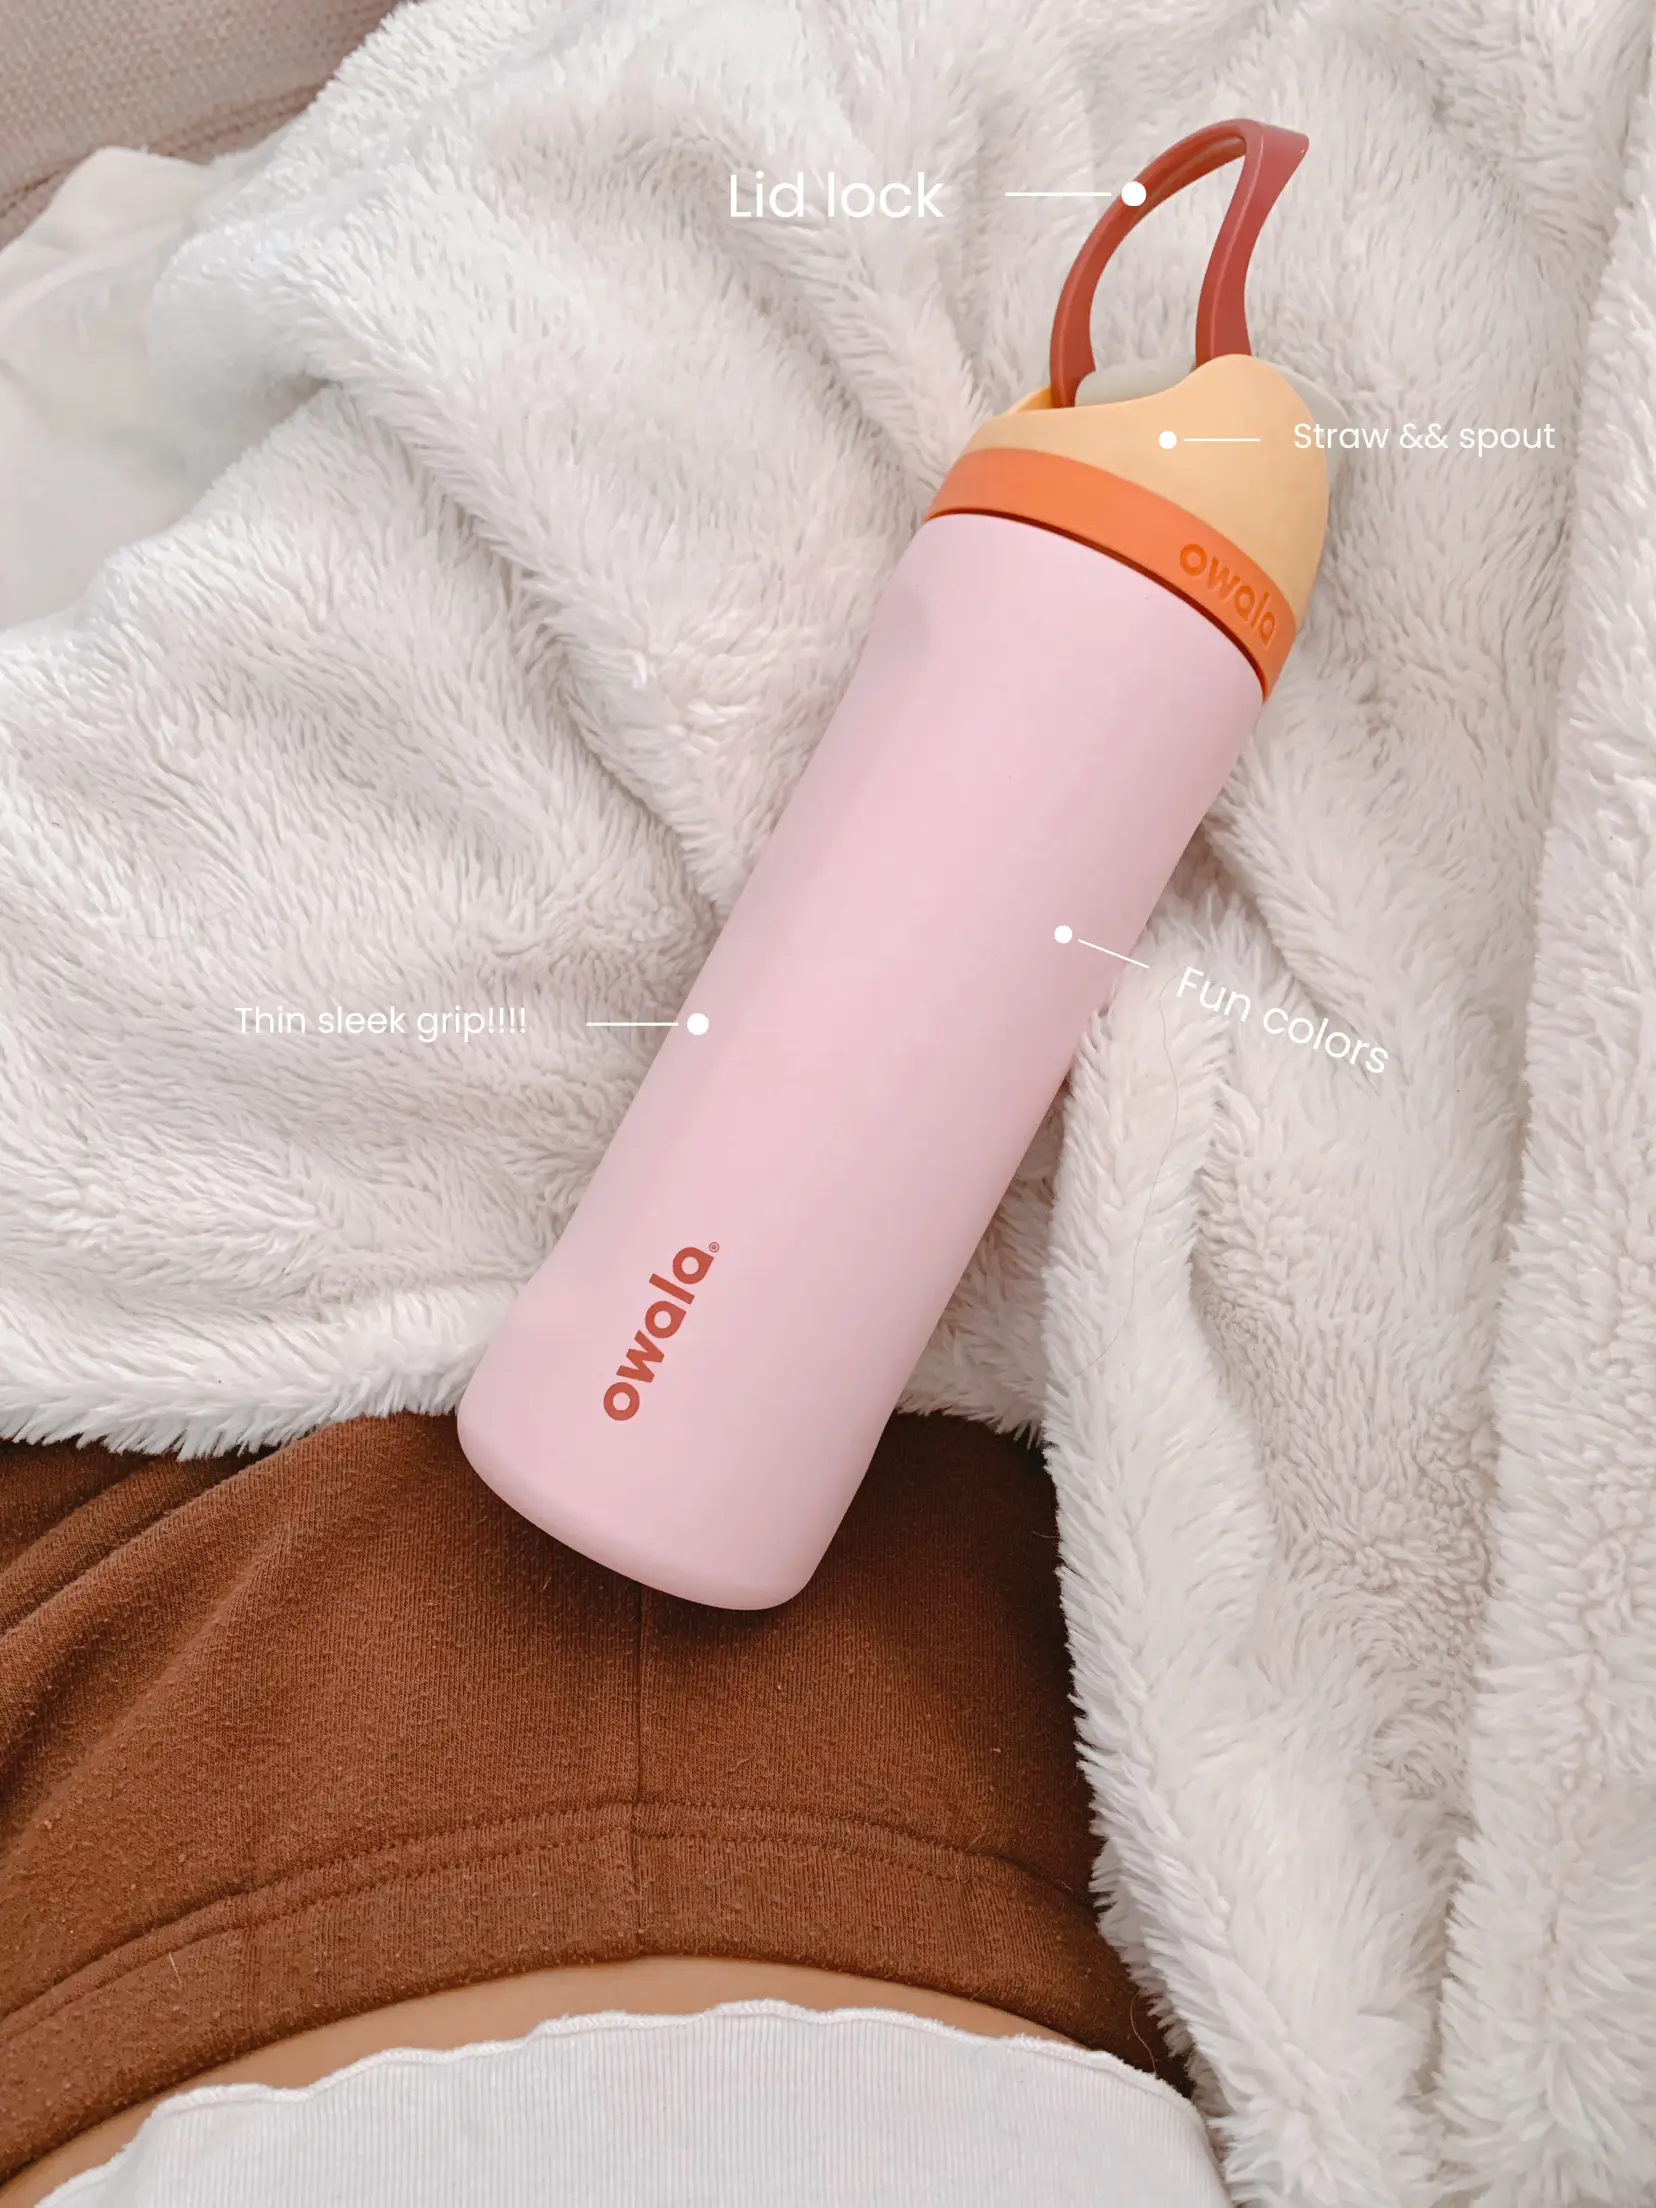 Owala Free Sip 24oz Stainless Steel Water Bottle - Pink Taupe